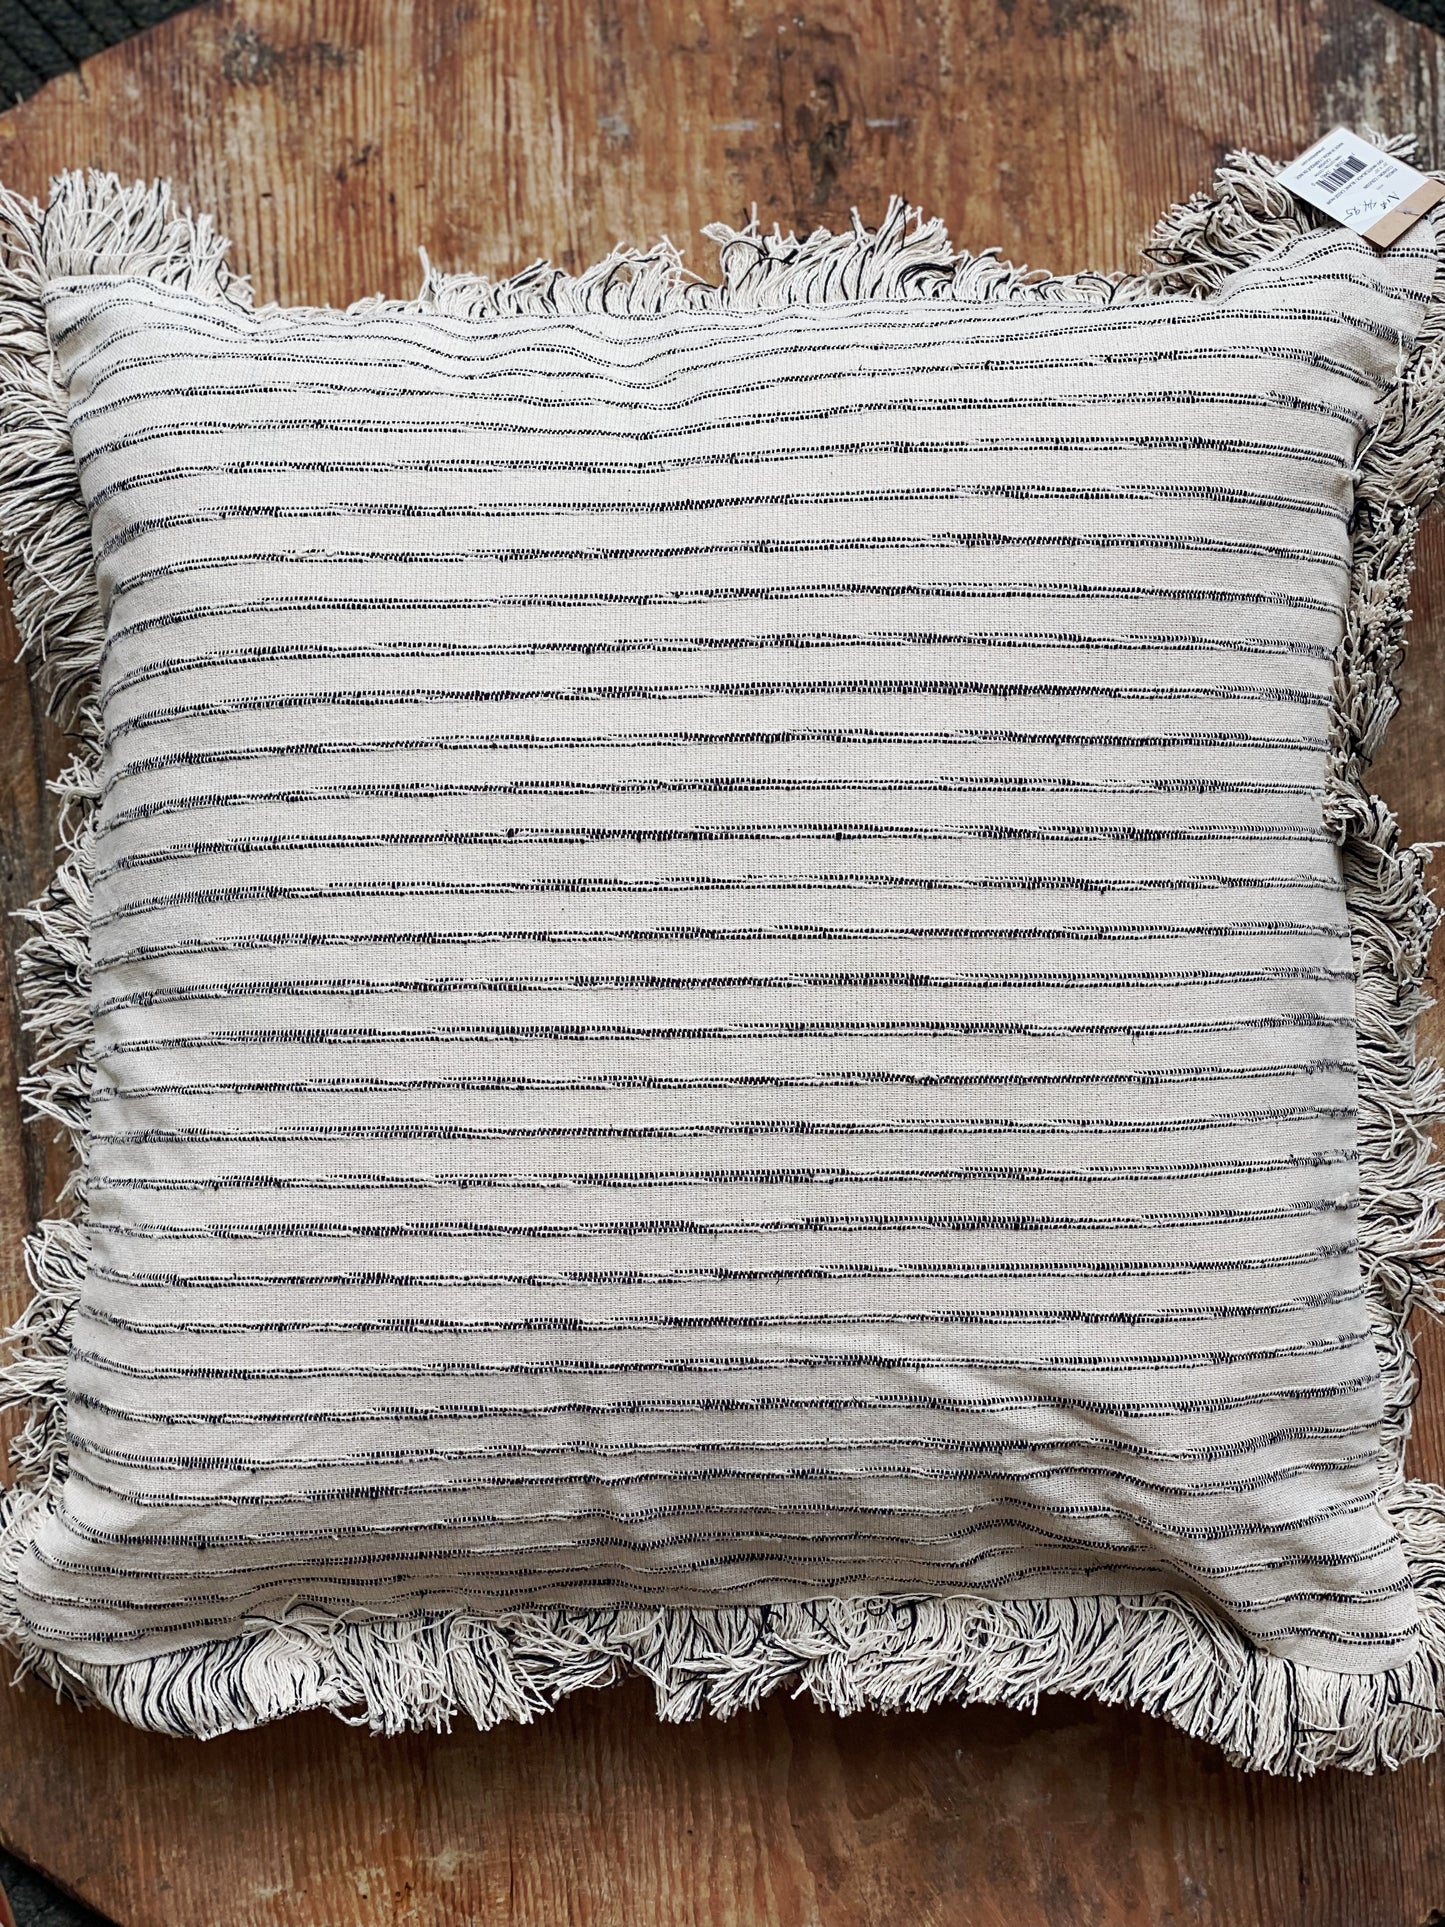 Black and Cream Striped Pillow